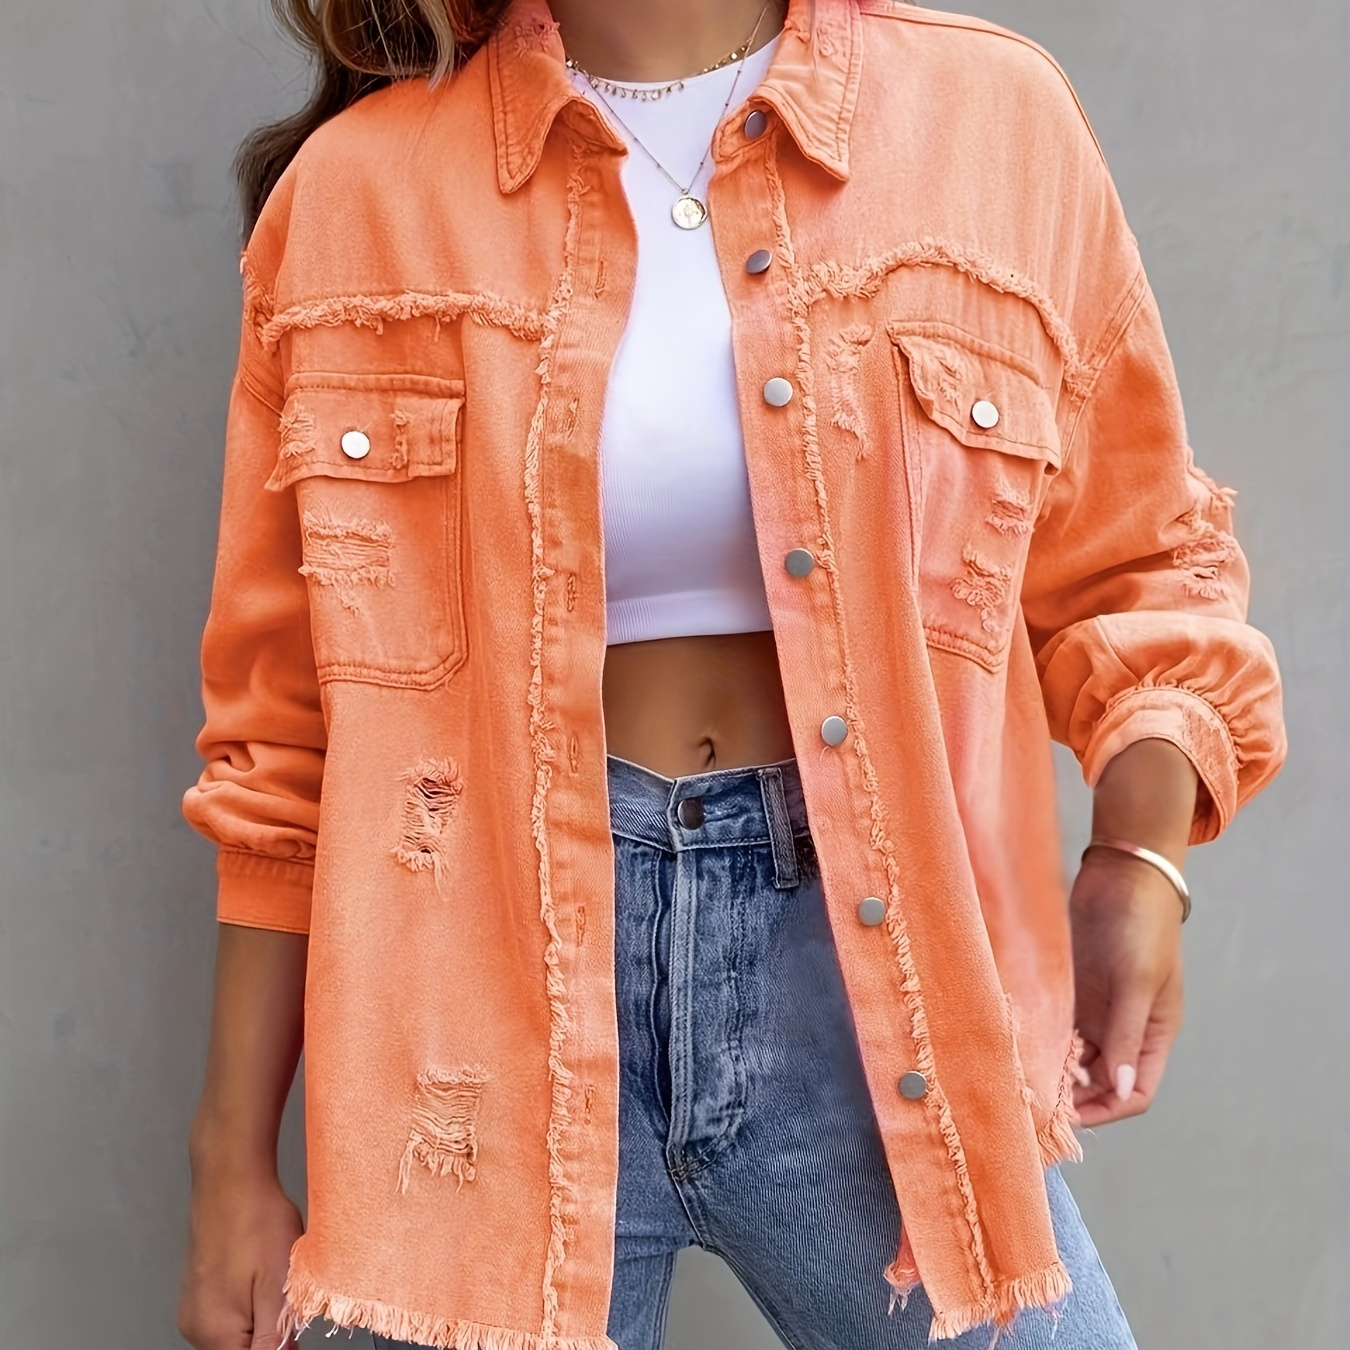 

Plus Size Casual Denim Top, Women's Plus Solid Ripped Button Up Long Sleeve Turn Down Collar Fringe Trim Denim Jacket For Koningsdag/king's Day